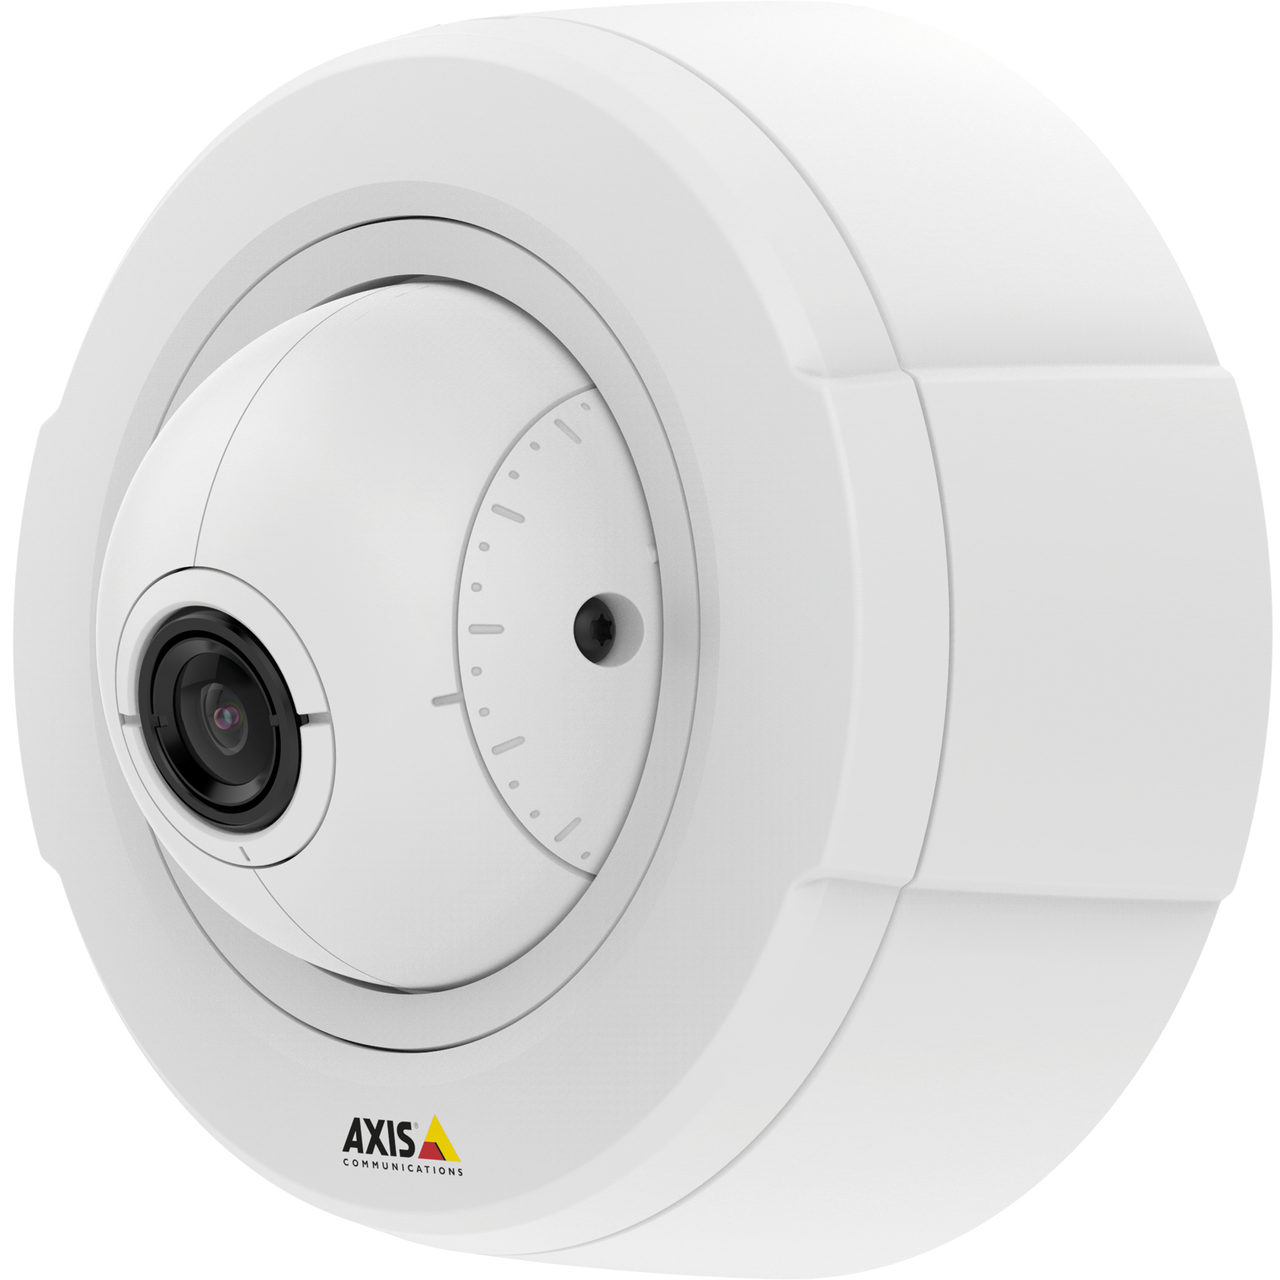 AXIS P1290-E 4 MM 8.3 FPS Discreet, budget-friendly and outdoor ready thermal detection